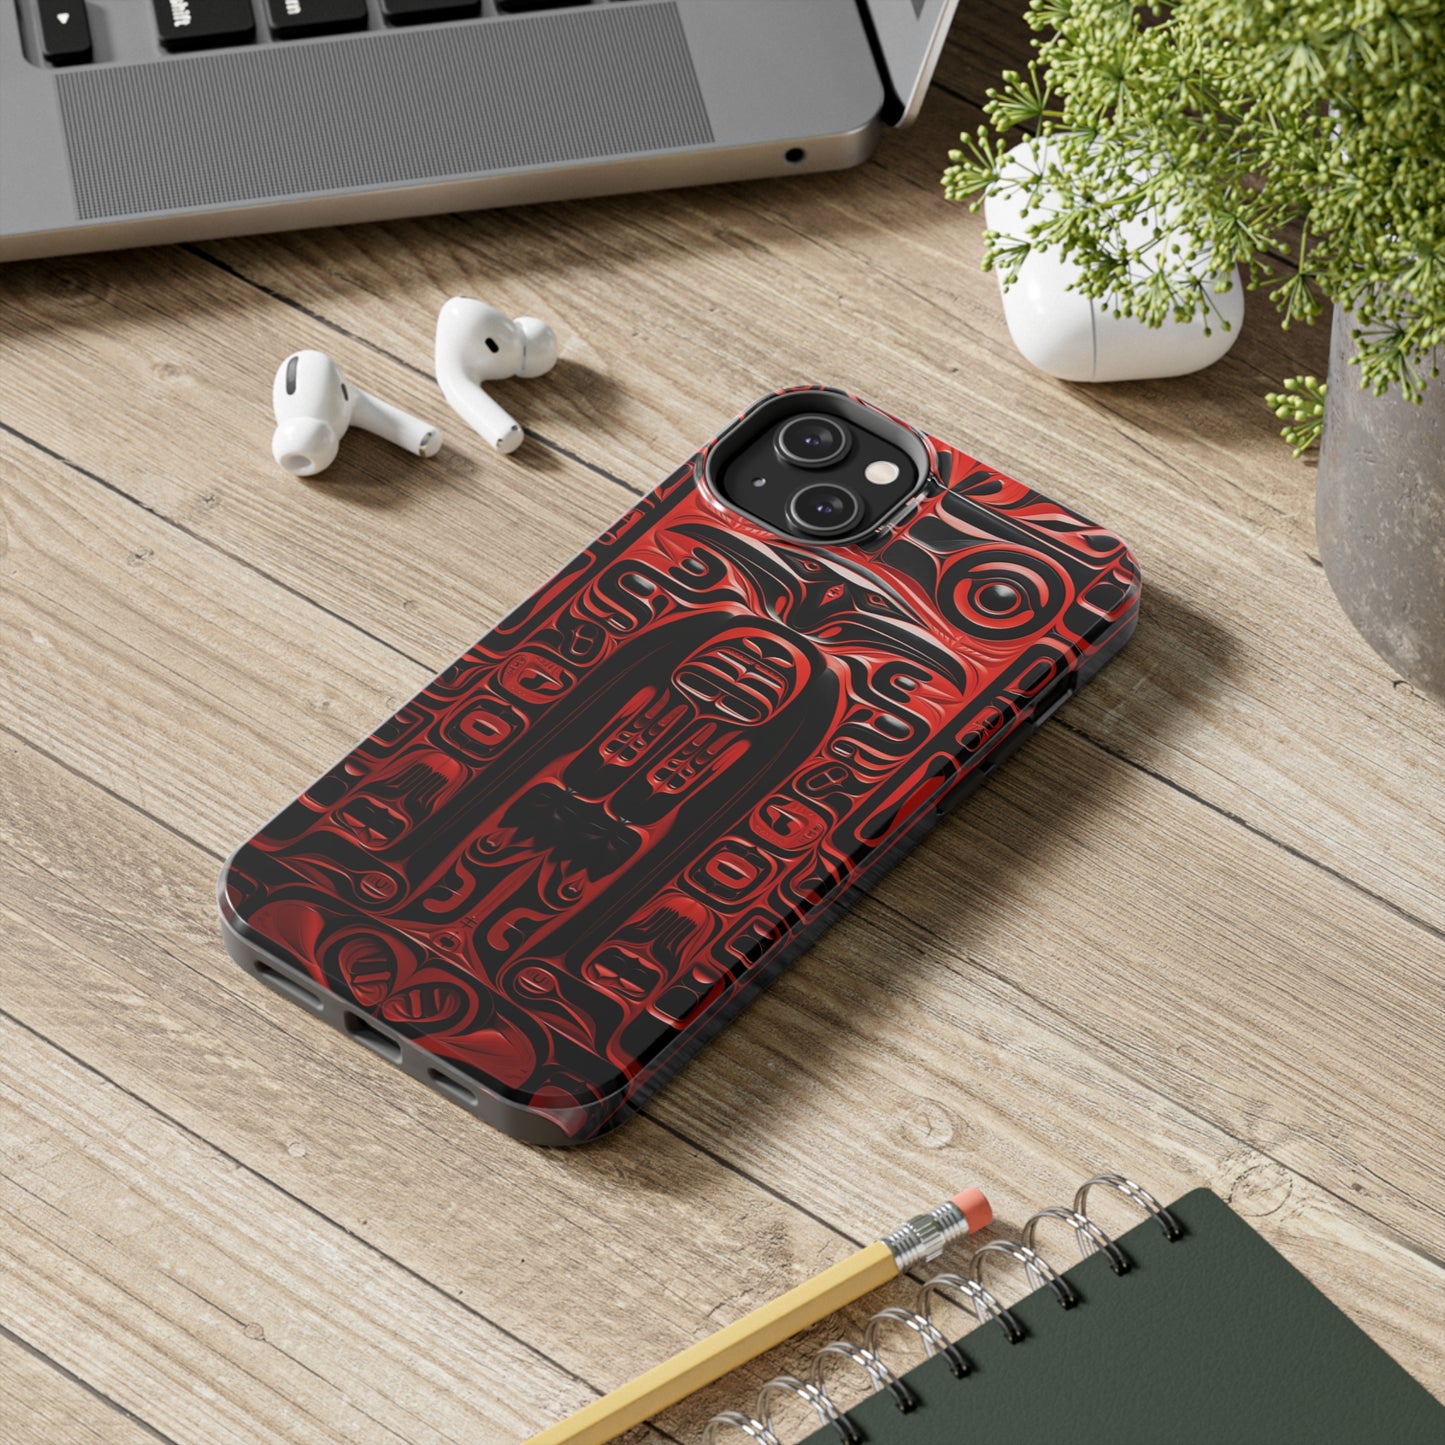 Raven Totems: Northwest Native American Carving | Heritage iPhone Case